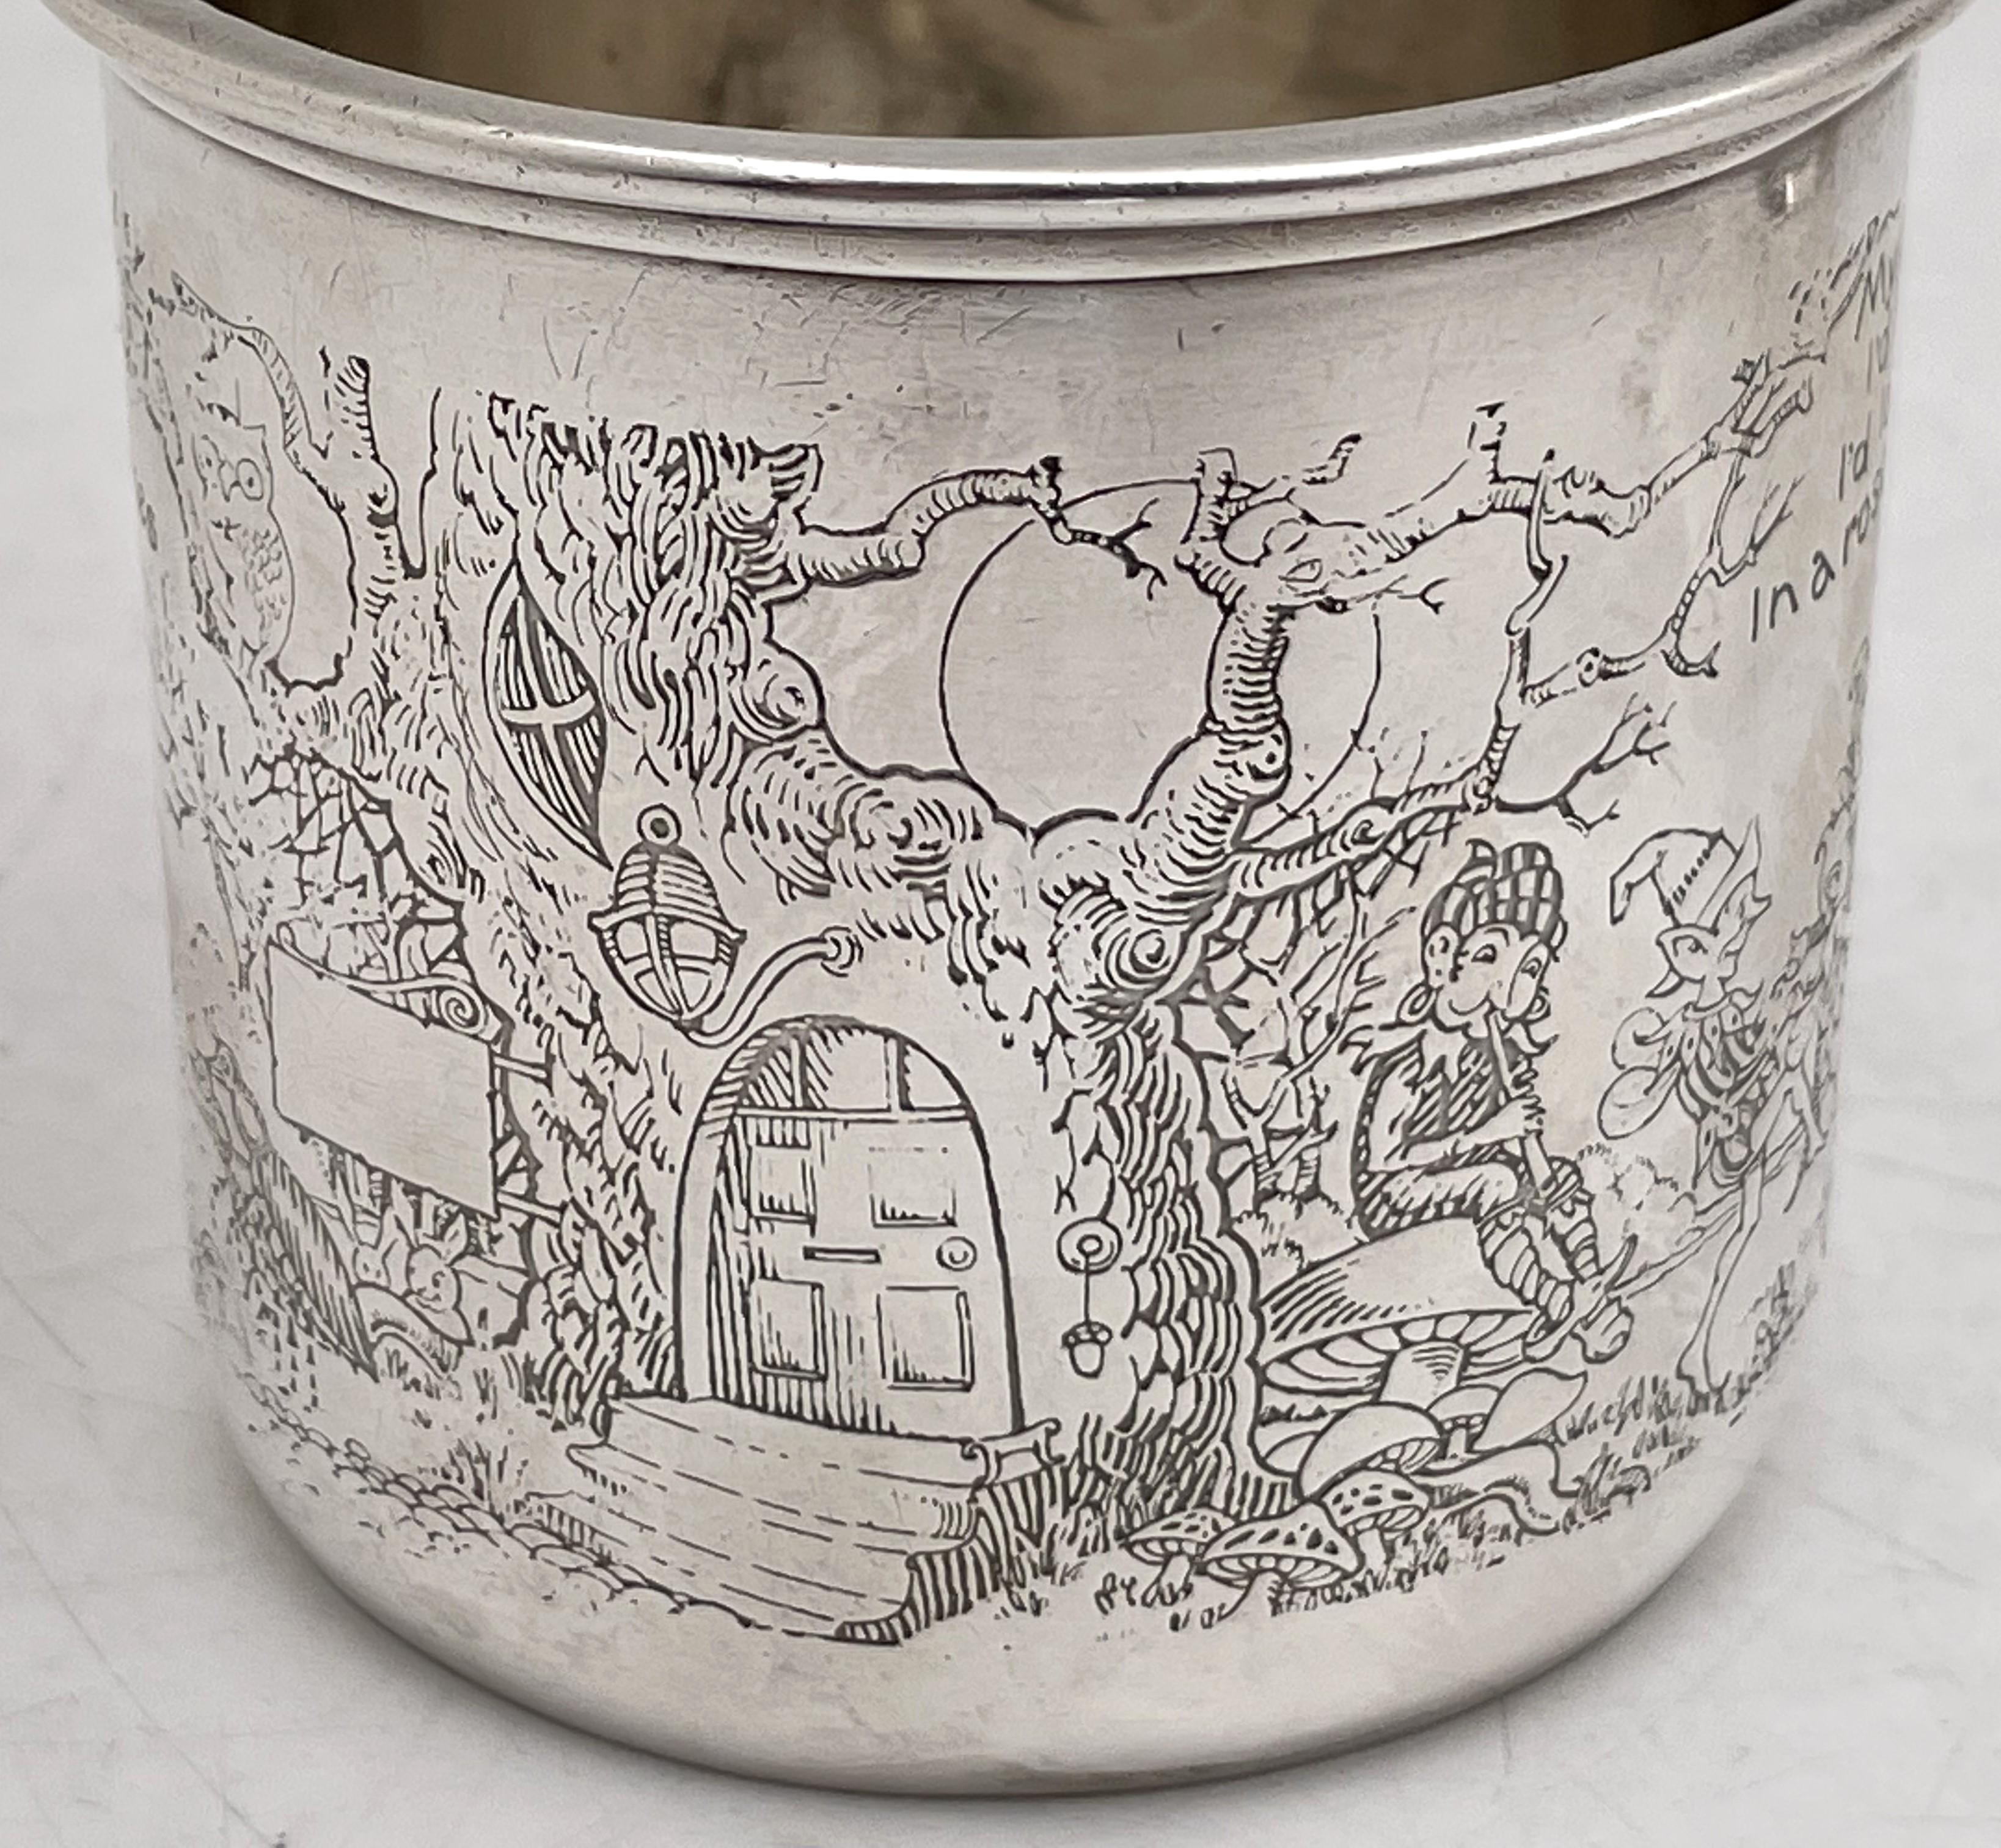 Gorham sterling silver child's or christening mug, from the early 20th century, adorned with acid-etched motifs including elves, rabbits, and trees. This collector's piece measures 2 5/8'' in height by 2 3/4'' in diameter at the top, weighs 2.8 troy